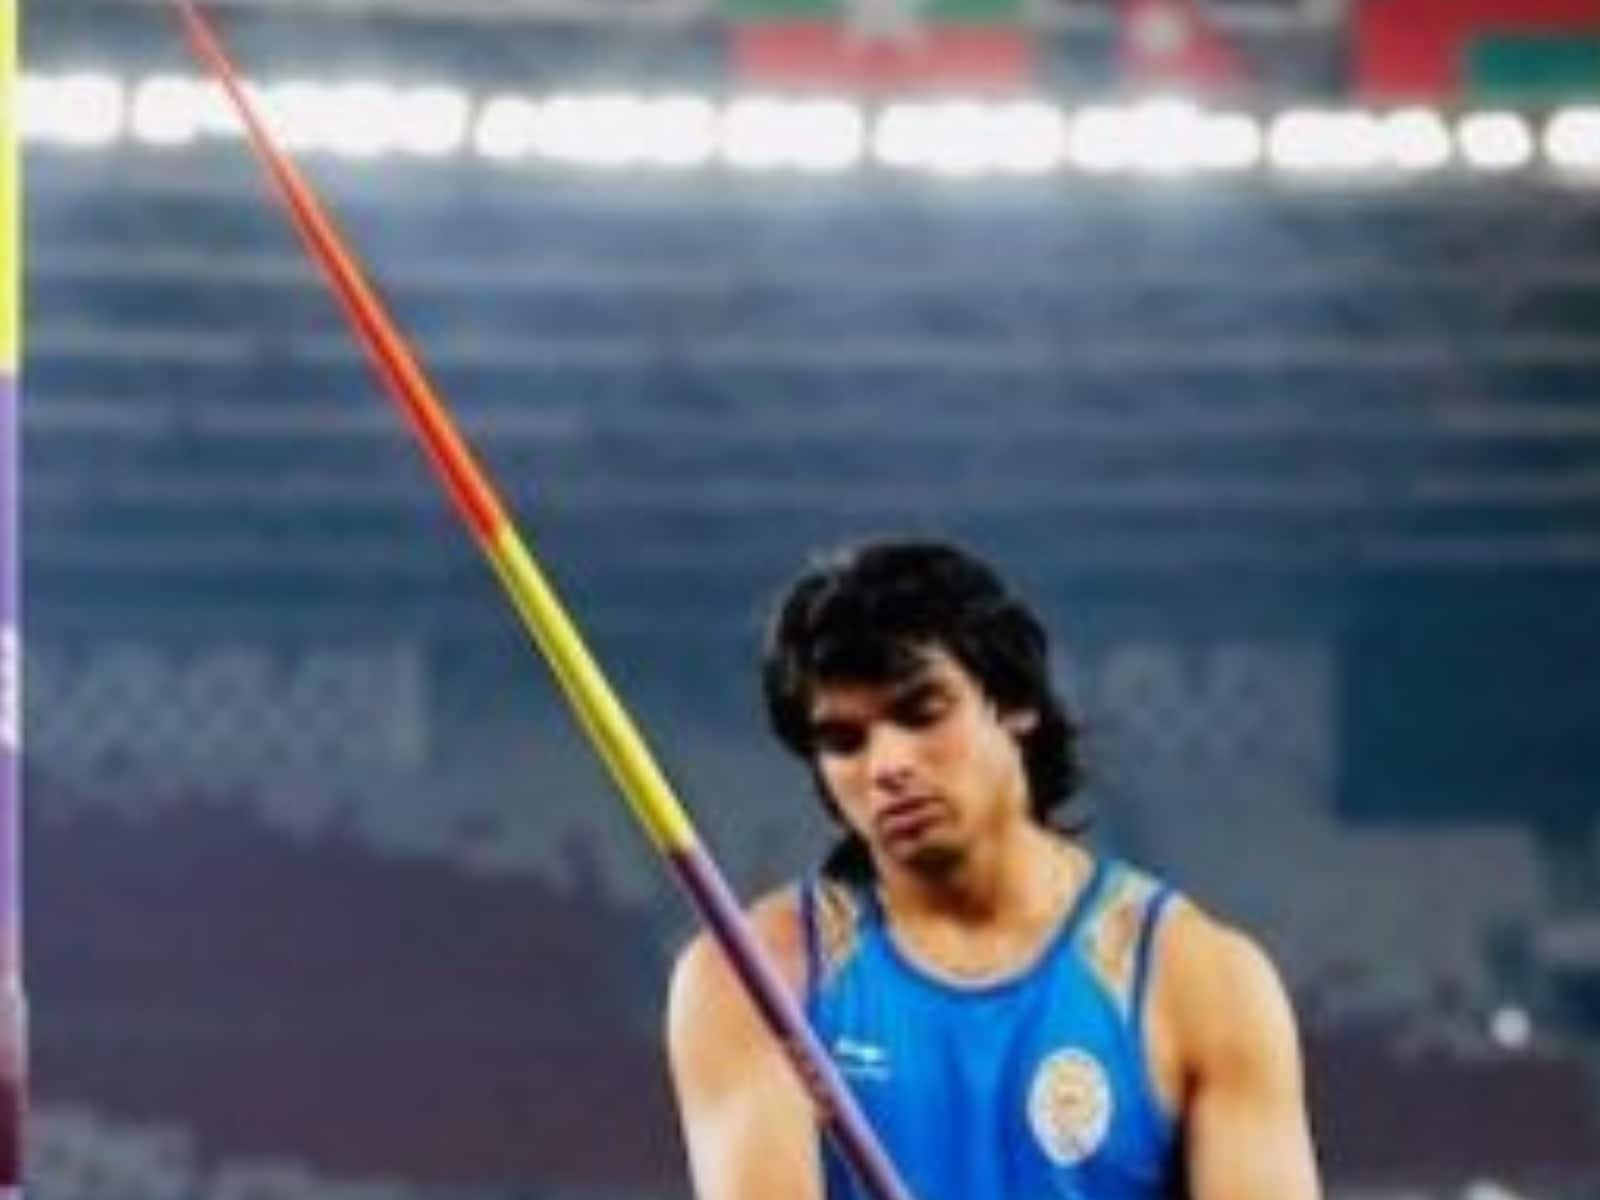 Tokyo Olympics: India's Best Hope for Athletics Medal, Neeraj Chopra in  Javelin Throw - All You Need to Know